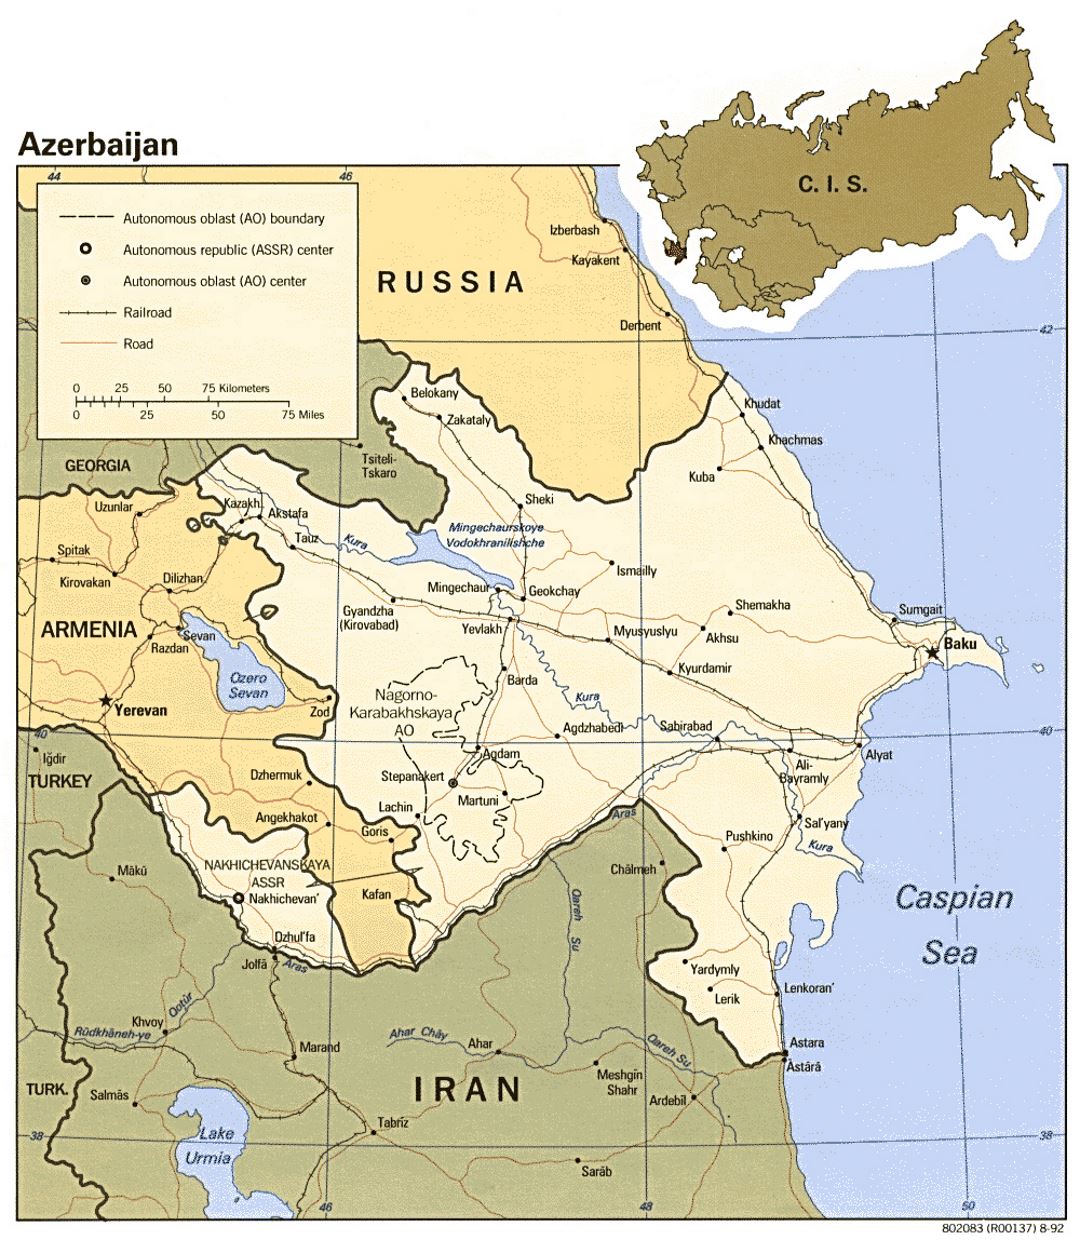 Detailed political map of Azerbaijan with roads, railroads and major cities - 1992